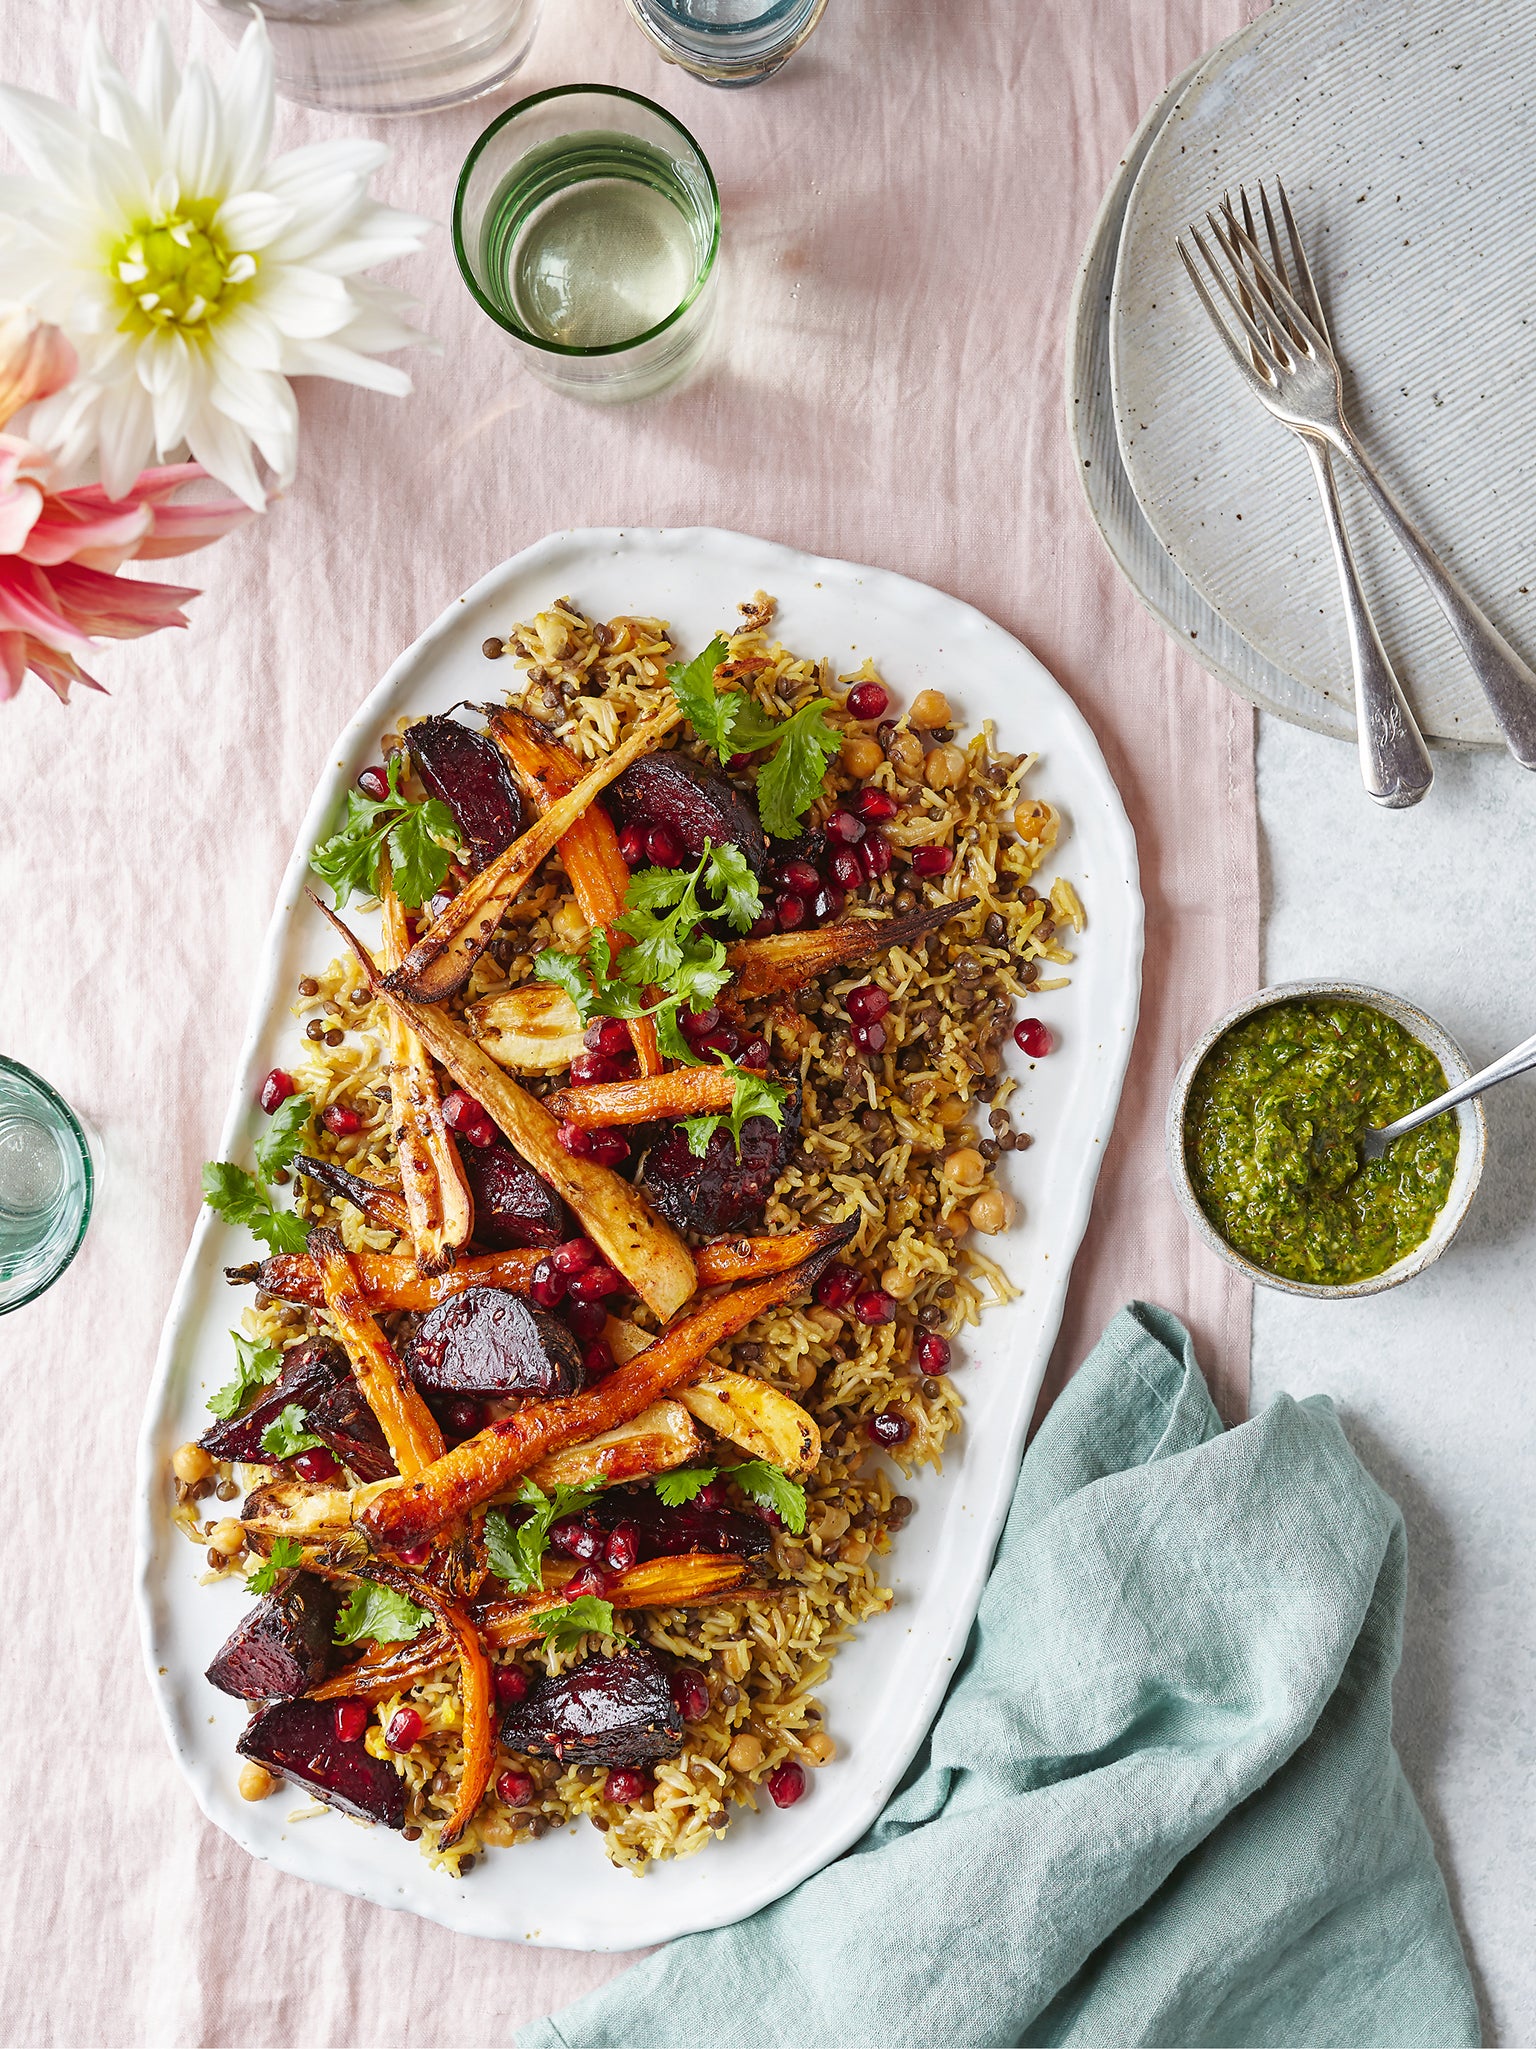 With parsnips, carrots and beetroot, this Middle Eastern-inspired vegan dish is a brilliant winter warmer